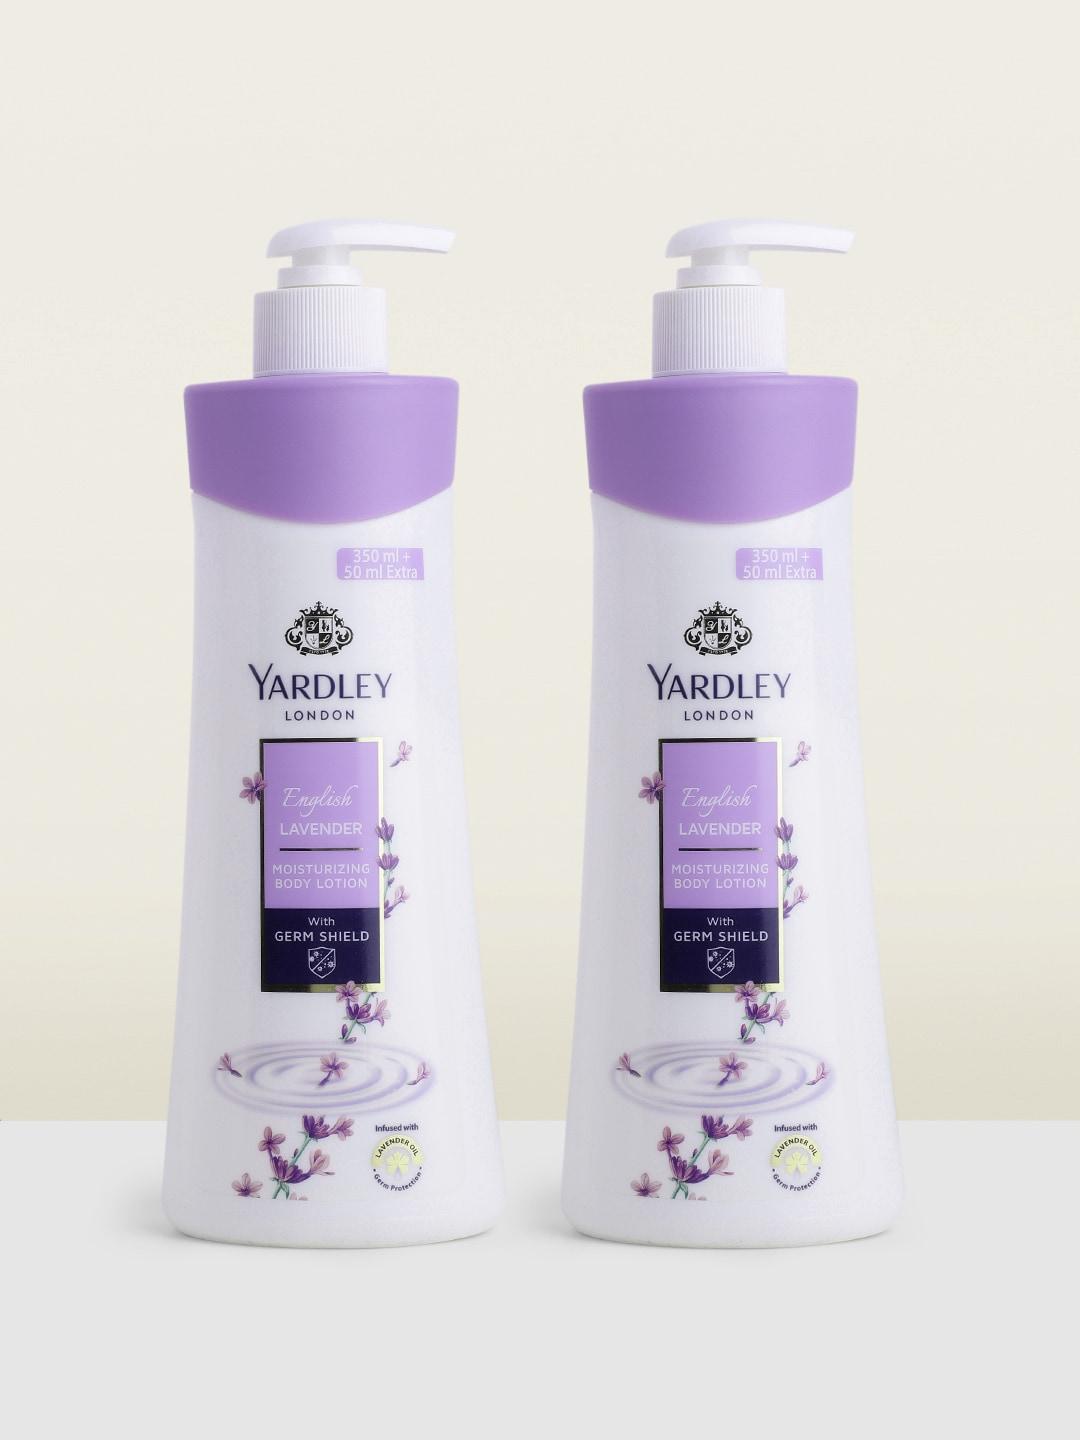 Yardley London Set of 2 English Lavender Hand & Body Lotion with Germ Shield - 400 ml each